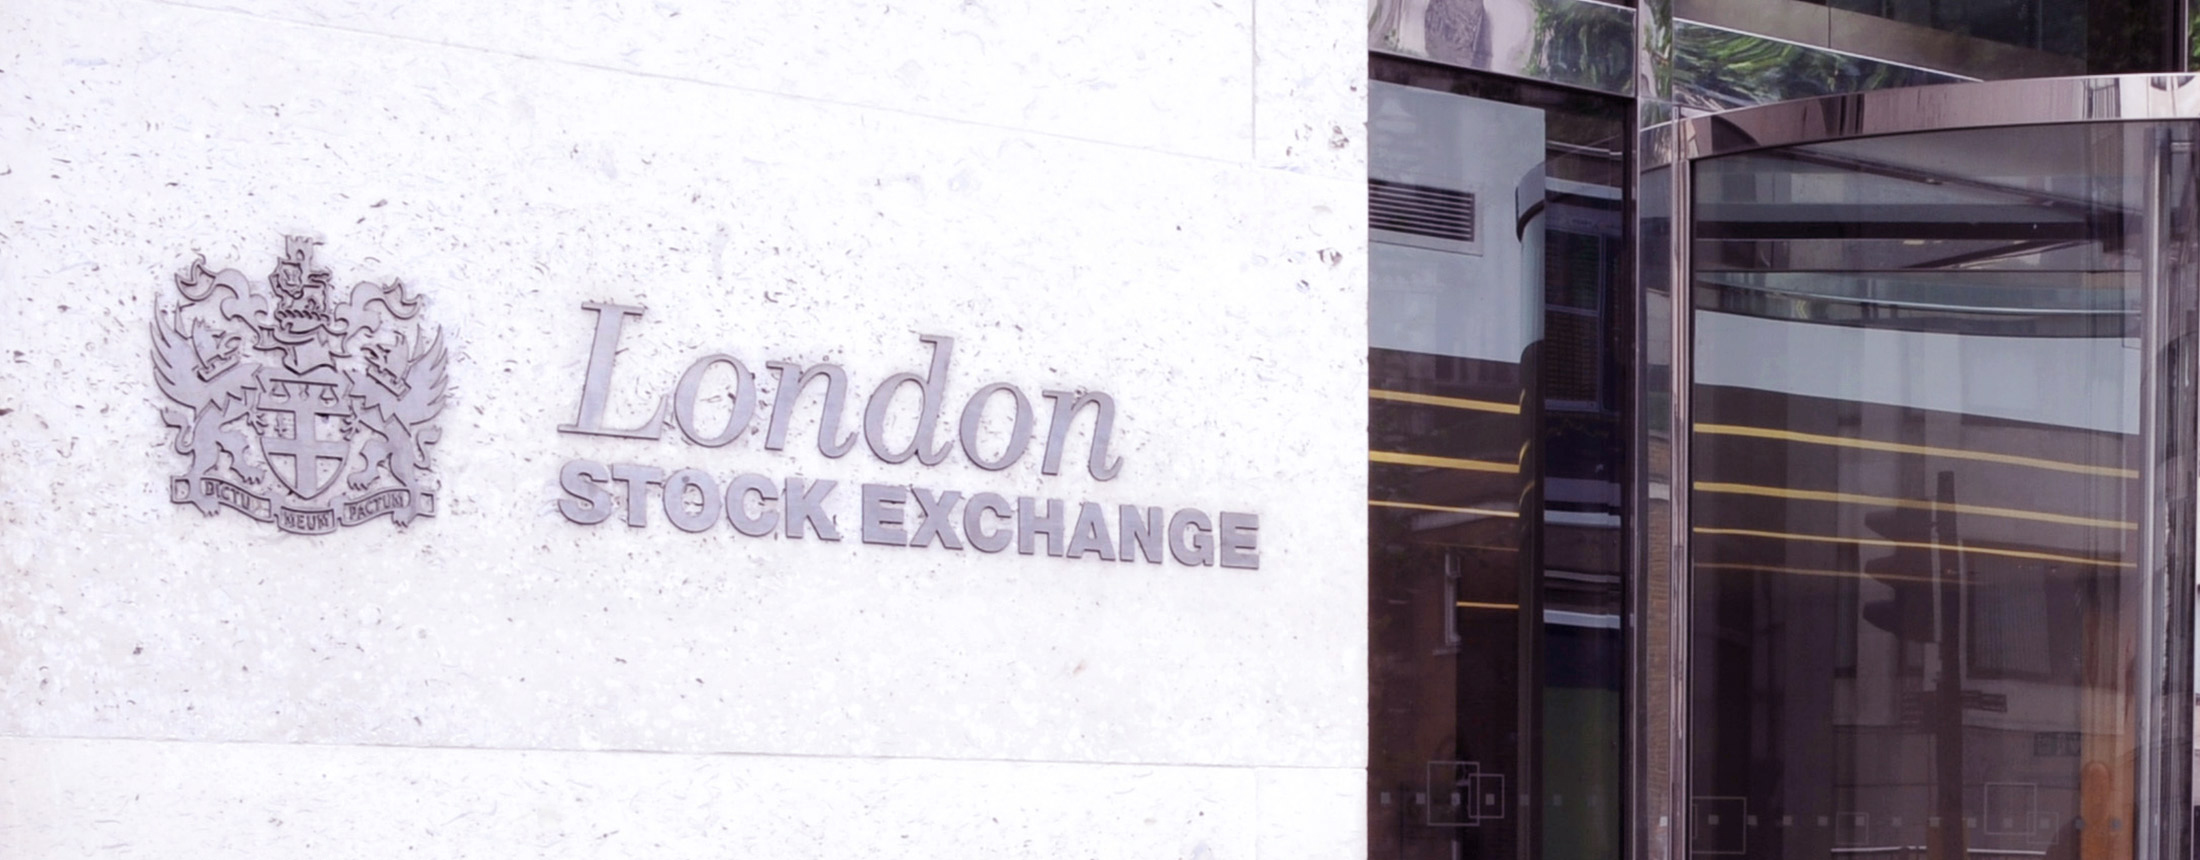 MUFG Media MUFG acts as Sole Coordinator for London Stock Exchange Group’s New Facility 2200x860